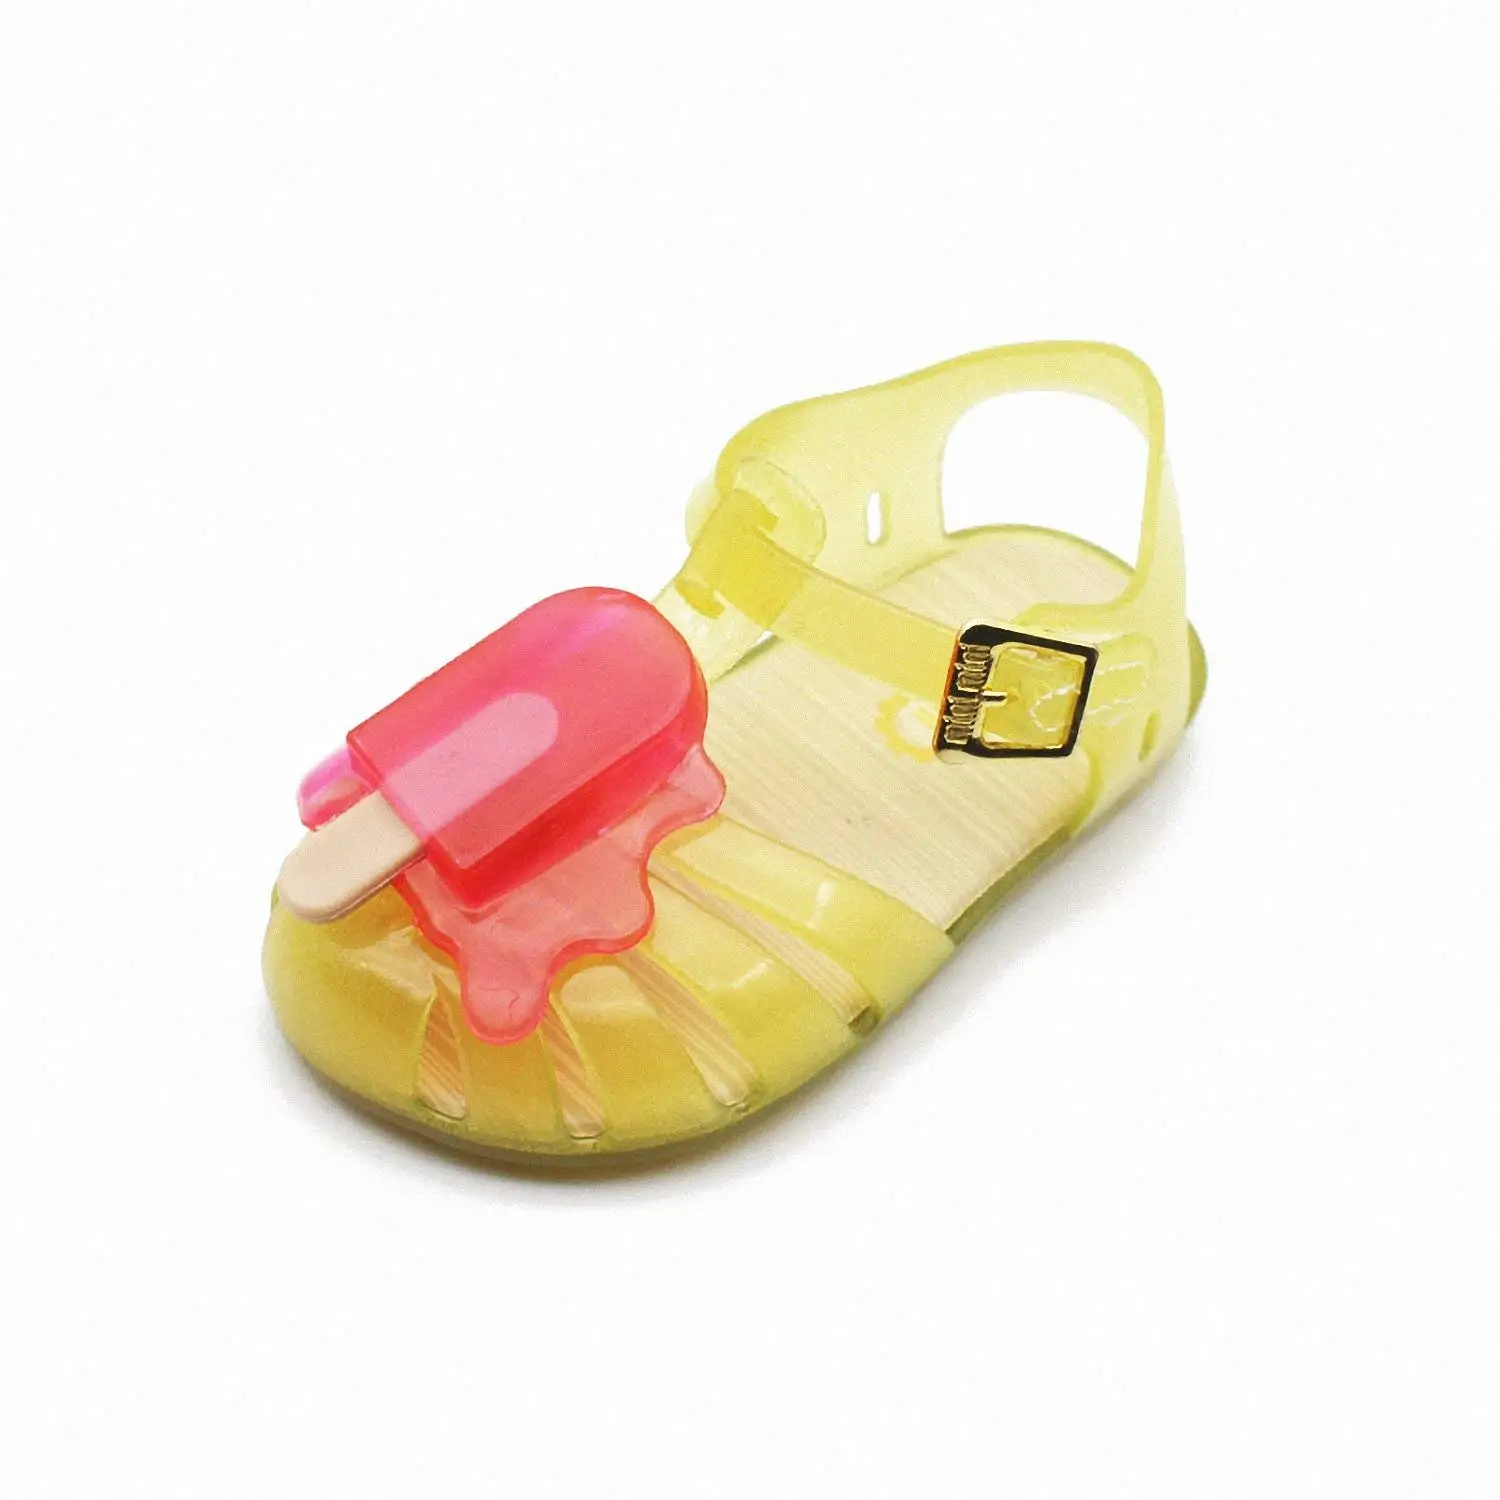 Cheap Baby Jelly Shoes Size 4, find 